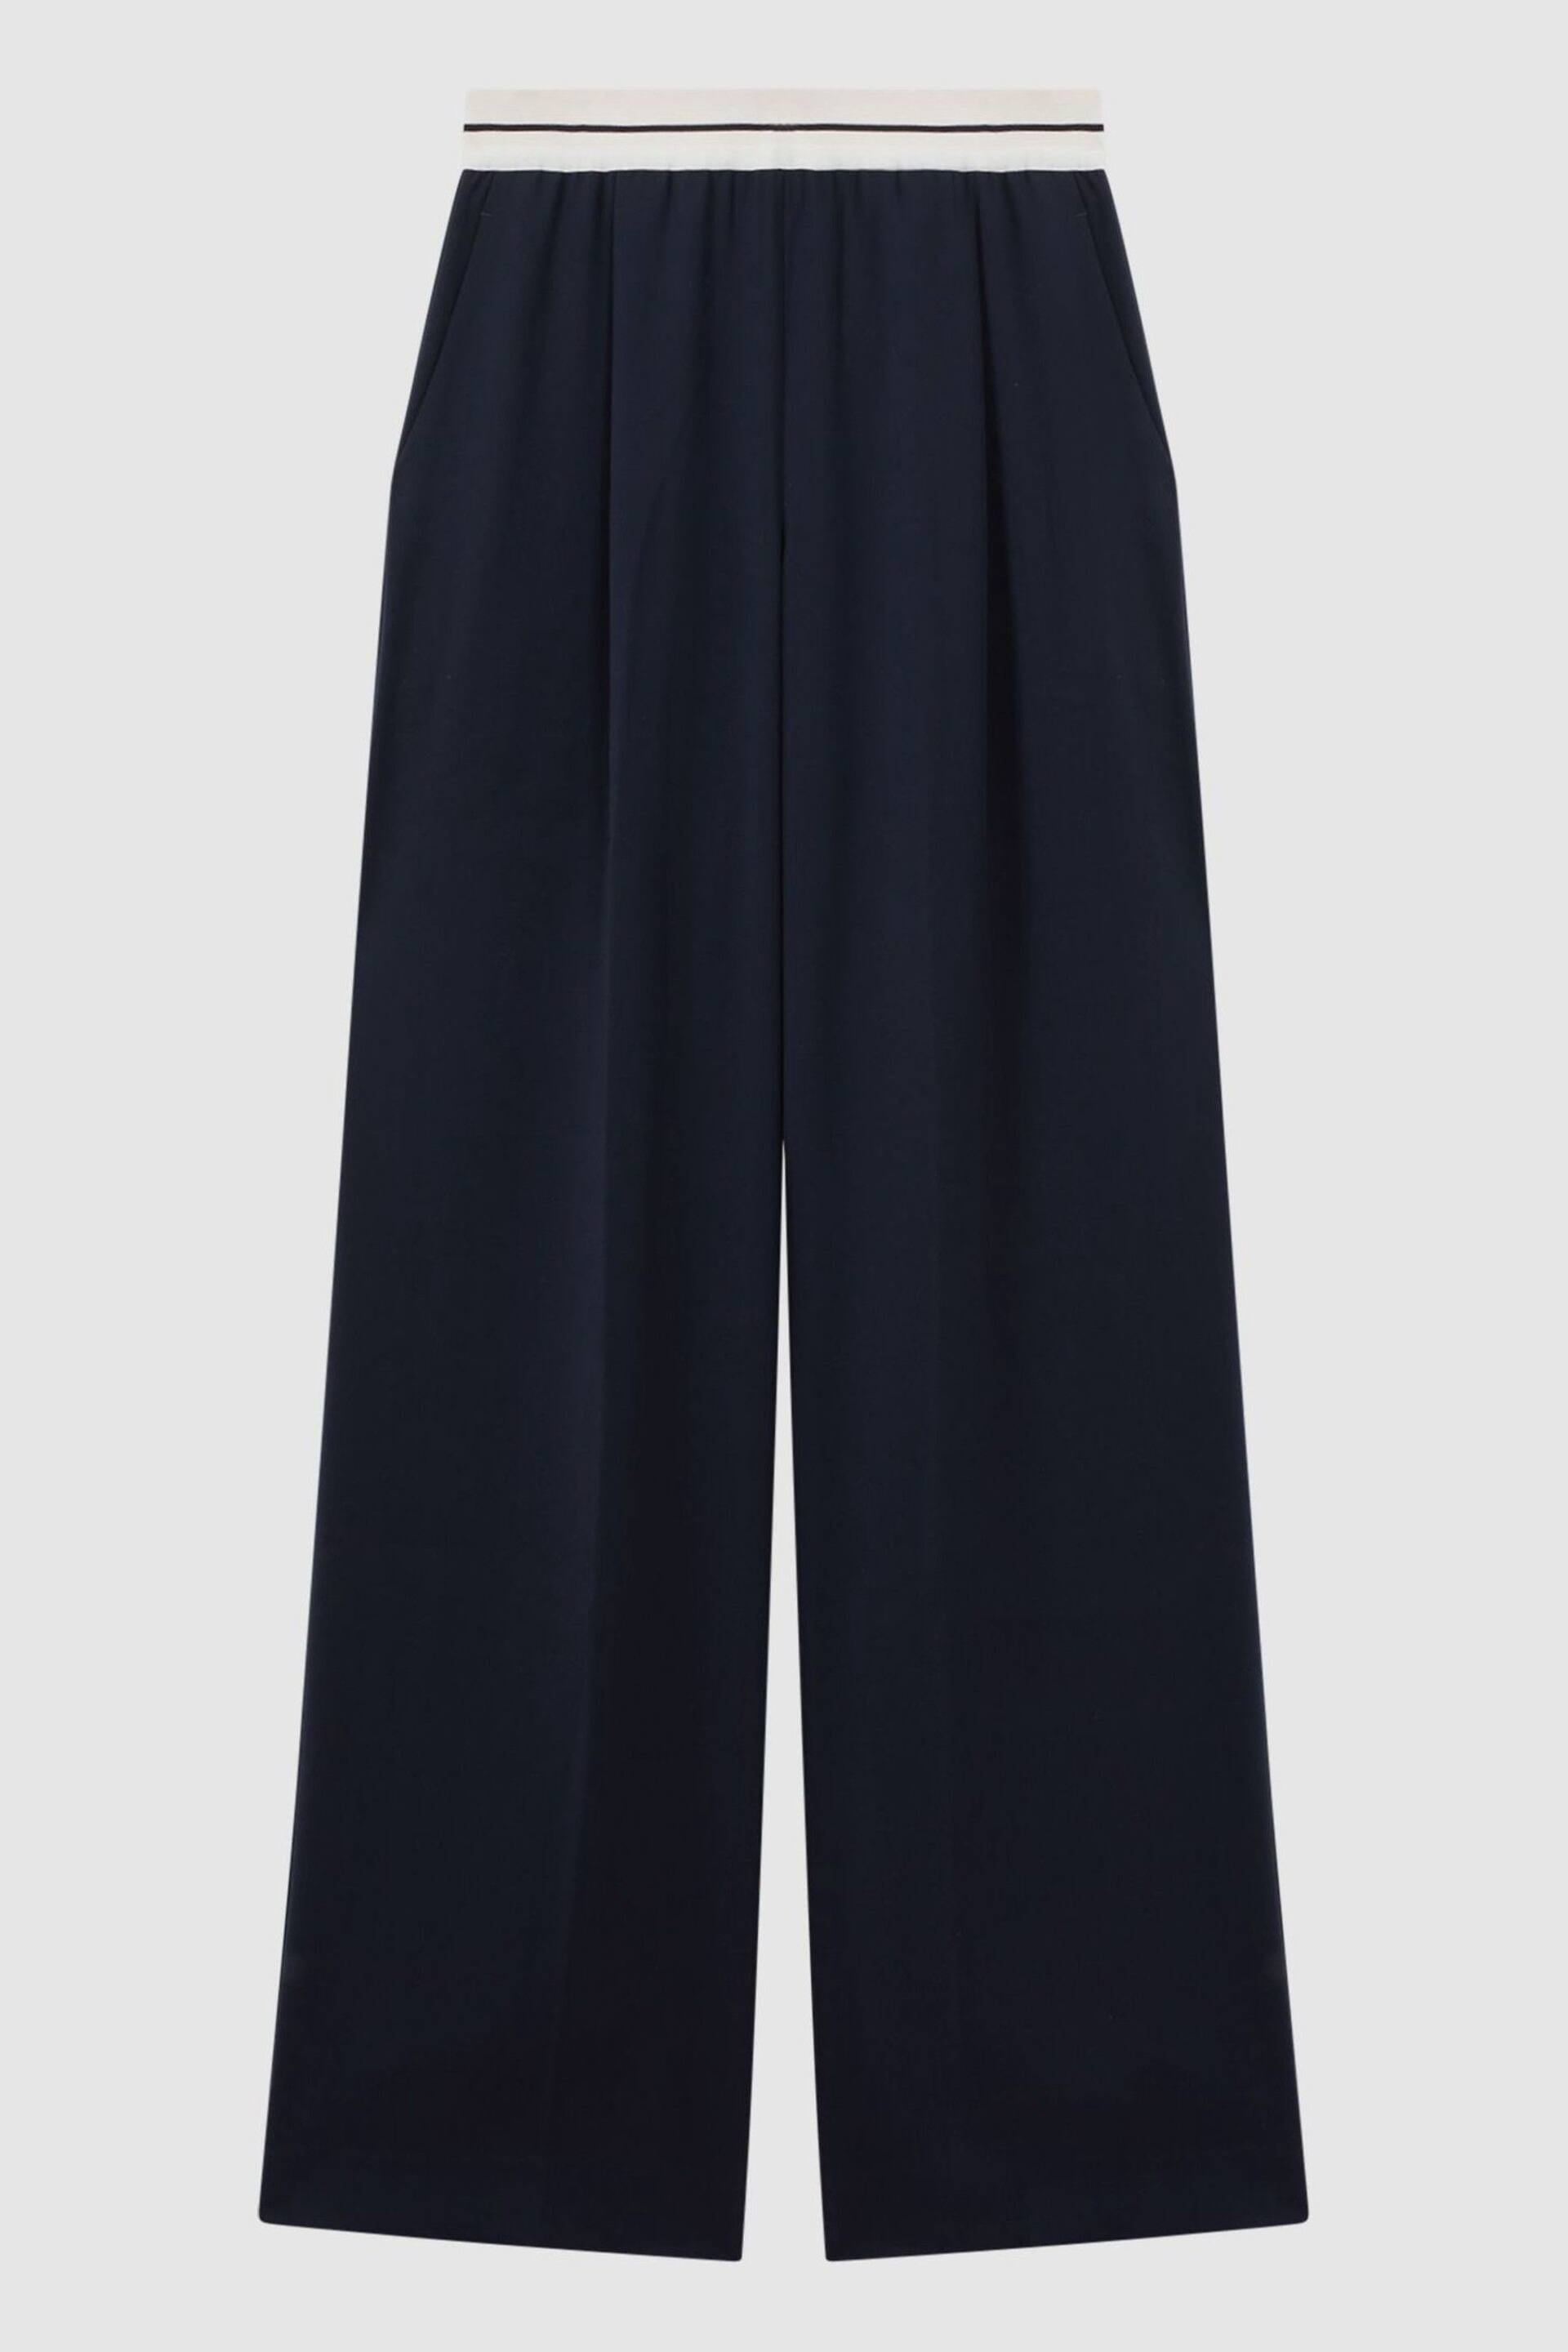 Reiss Navy Abigail Petite Wide Leg Elasticated Trousers - Image 2 of 7